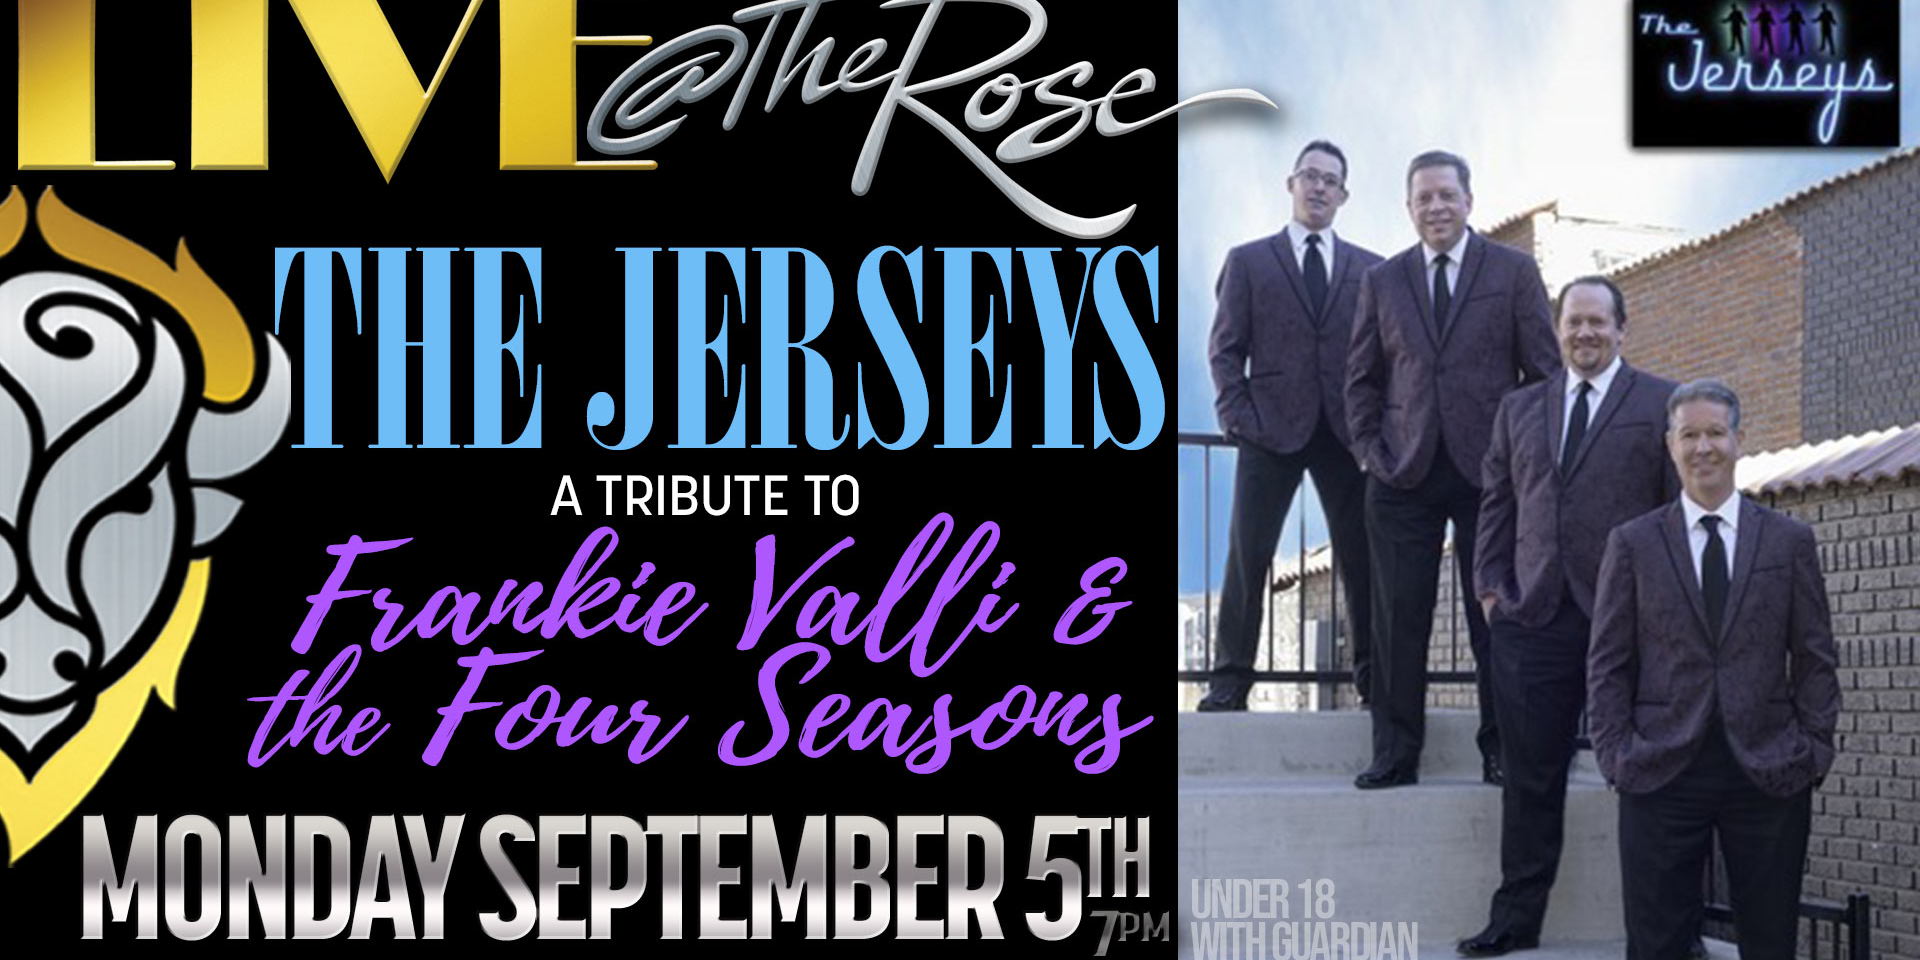 Live @ The Rose - The Jerseys promotional image